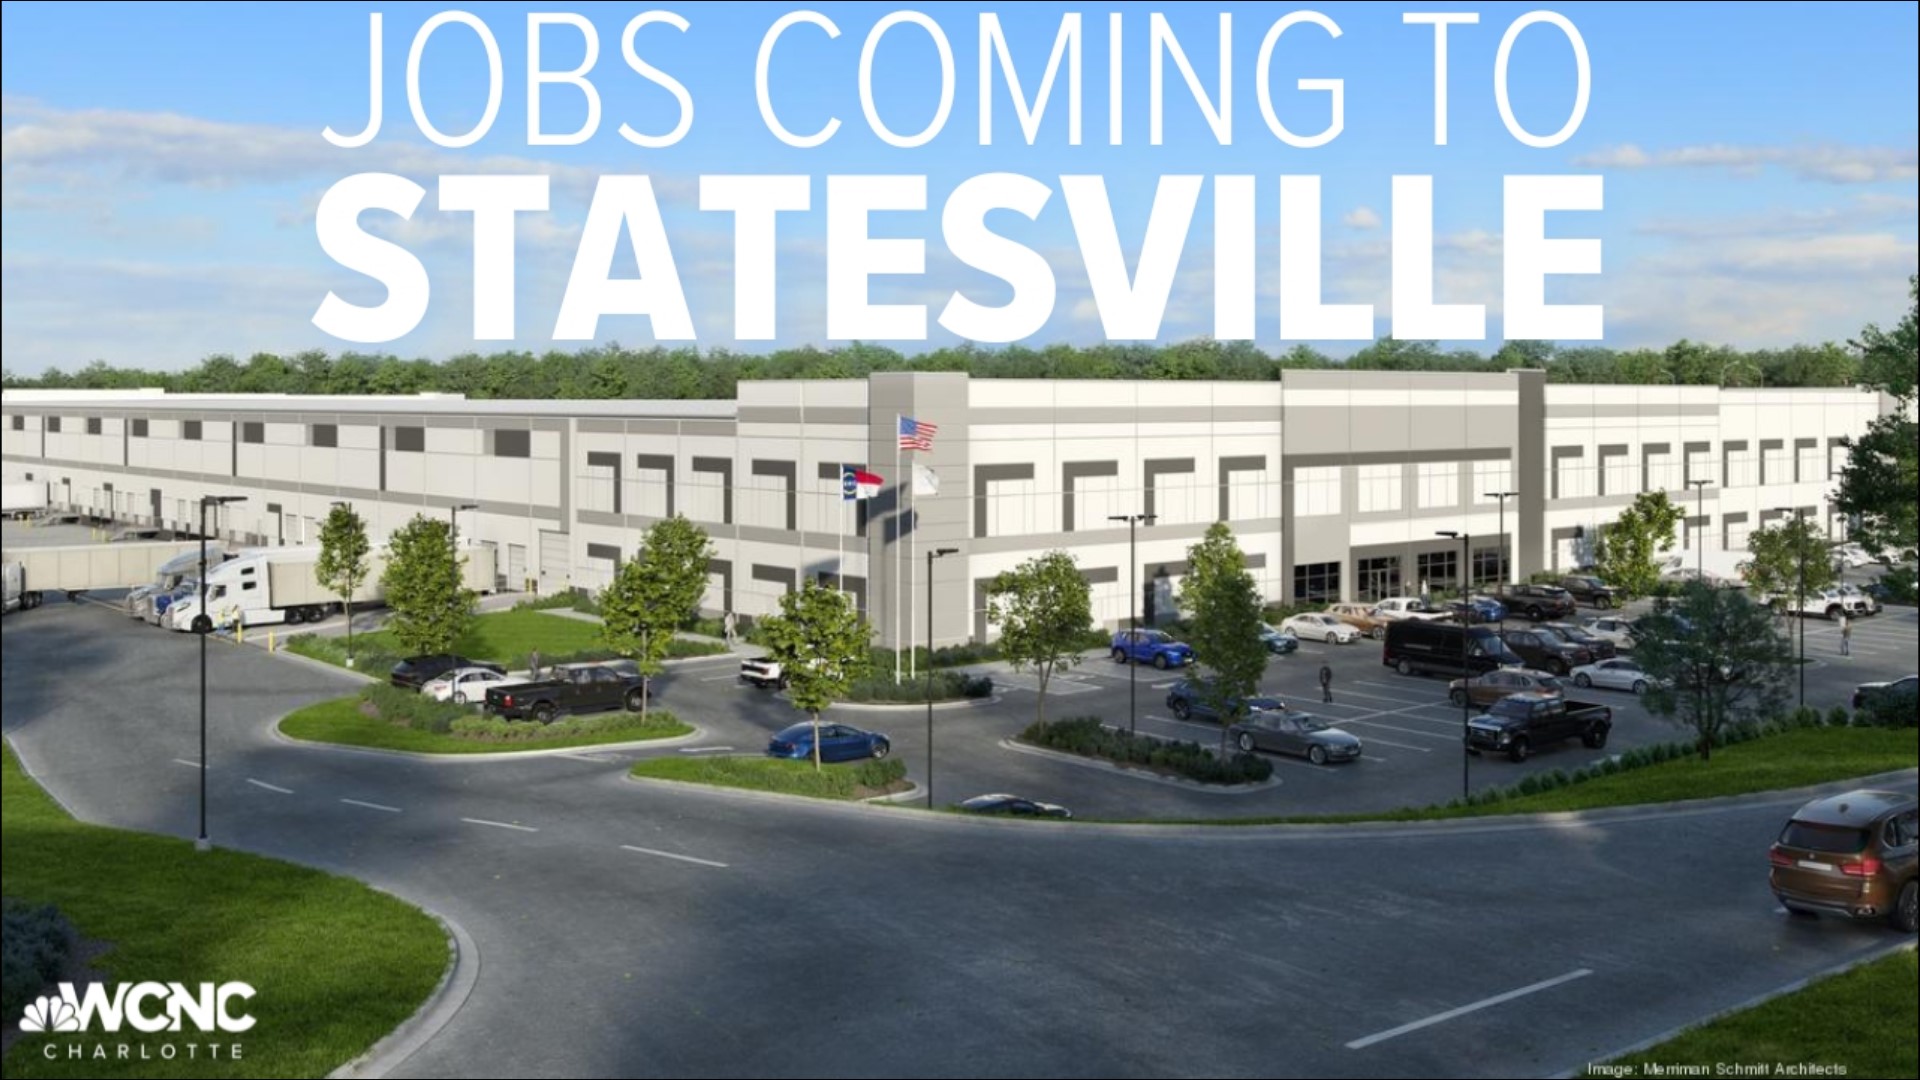 EPOC Enviro, an Australian company, announced the creation of its first U.S. manufacturing facility. The company chose Statesville for the spot.